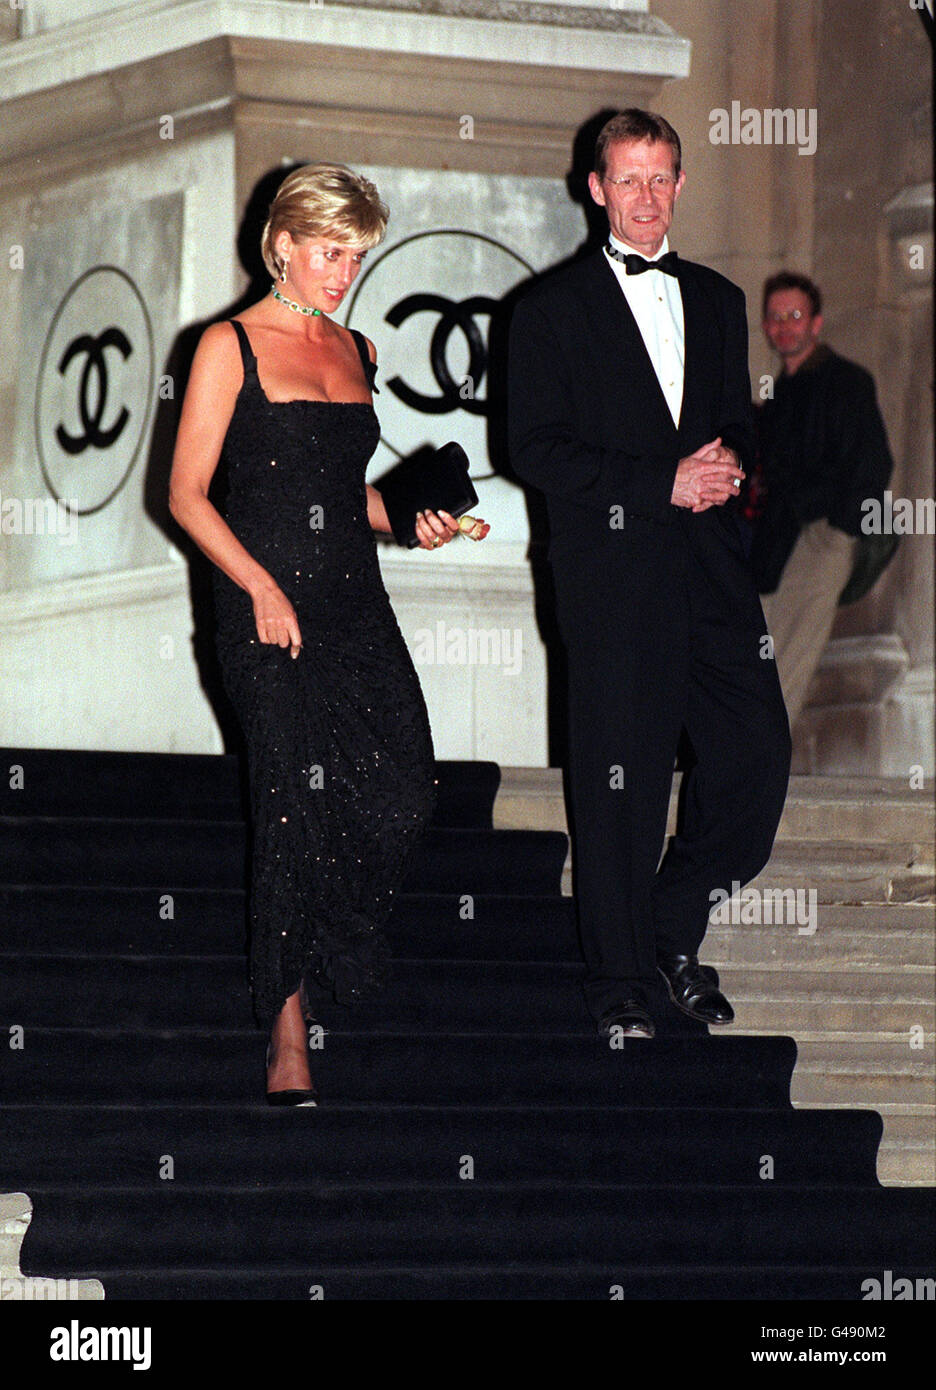 PA NEWS PHOTO : 1/7/97 : DIANA, PRINCESS OF WALES, WITH NICHOLAS SEROTA, DIRECTOR OF THE NEW TATE GALLERY, AT THE TATE GALLERY FOR A CENTENARY GALA DINNER. PHOTO BY DAVE CHESKIN. Stock Photo